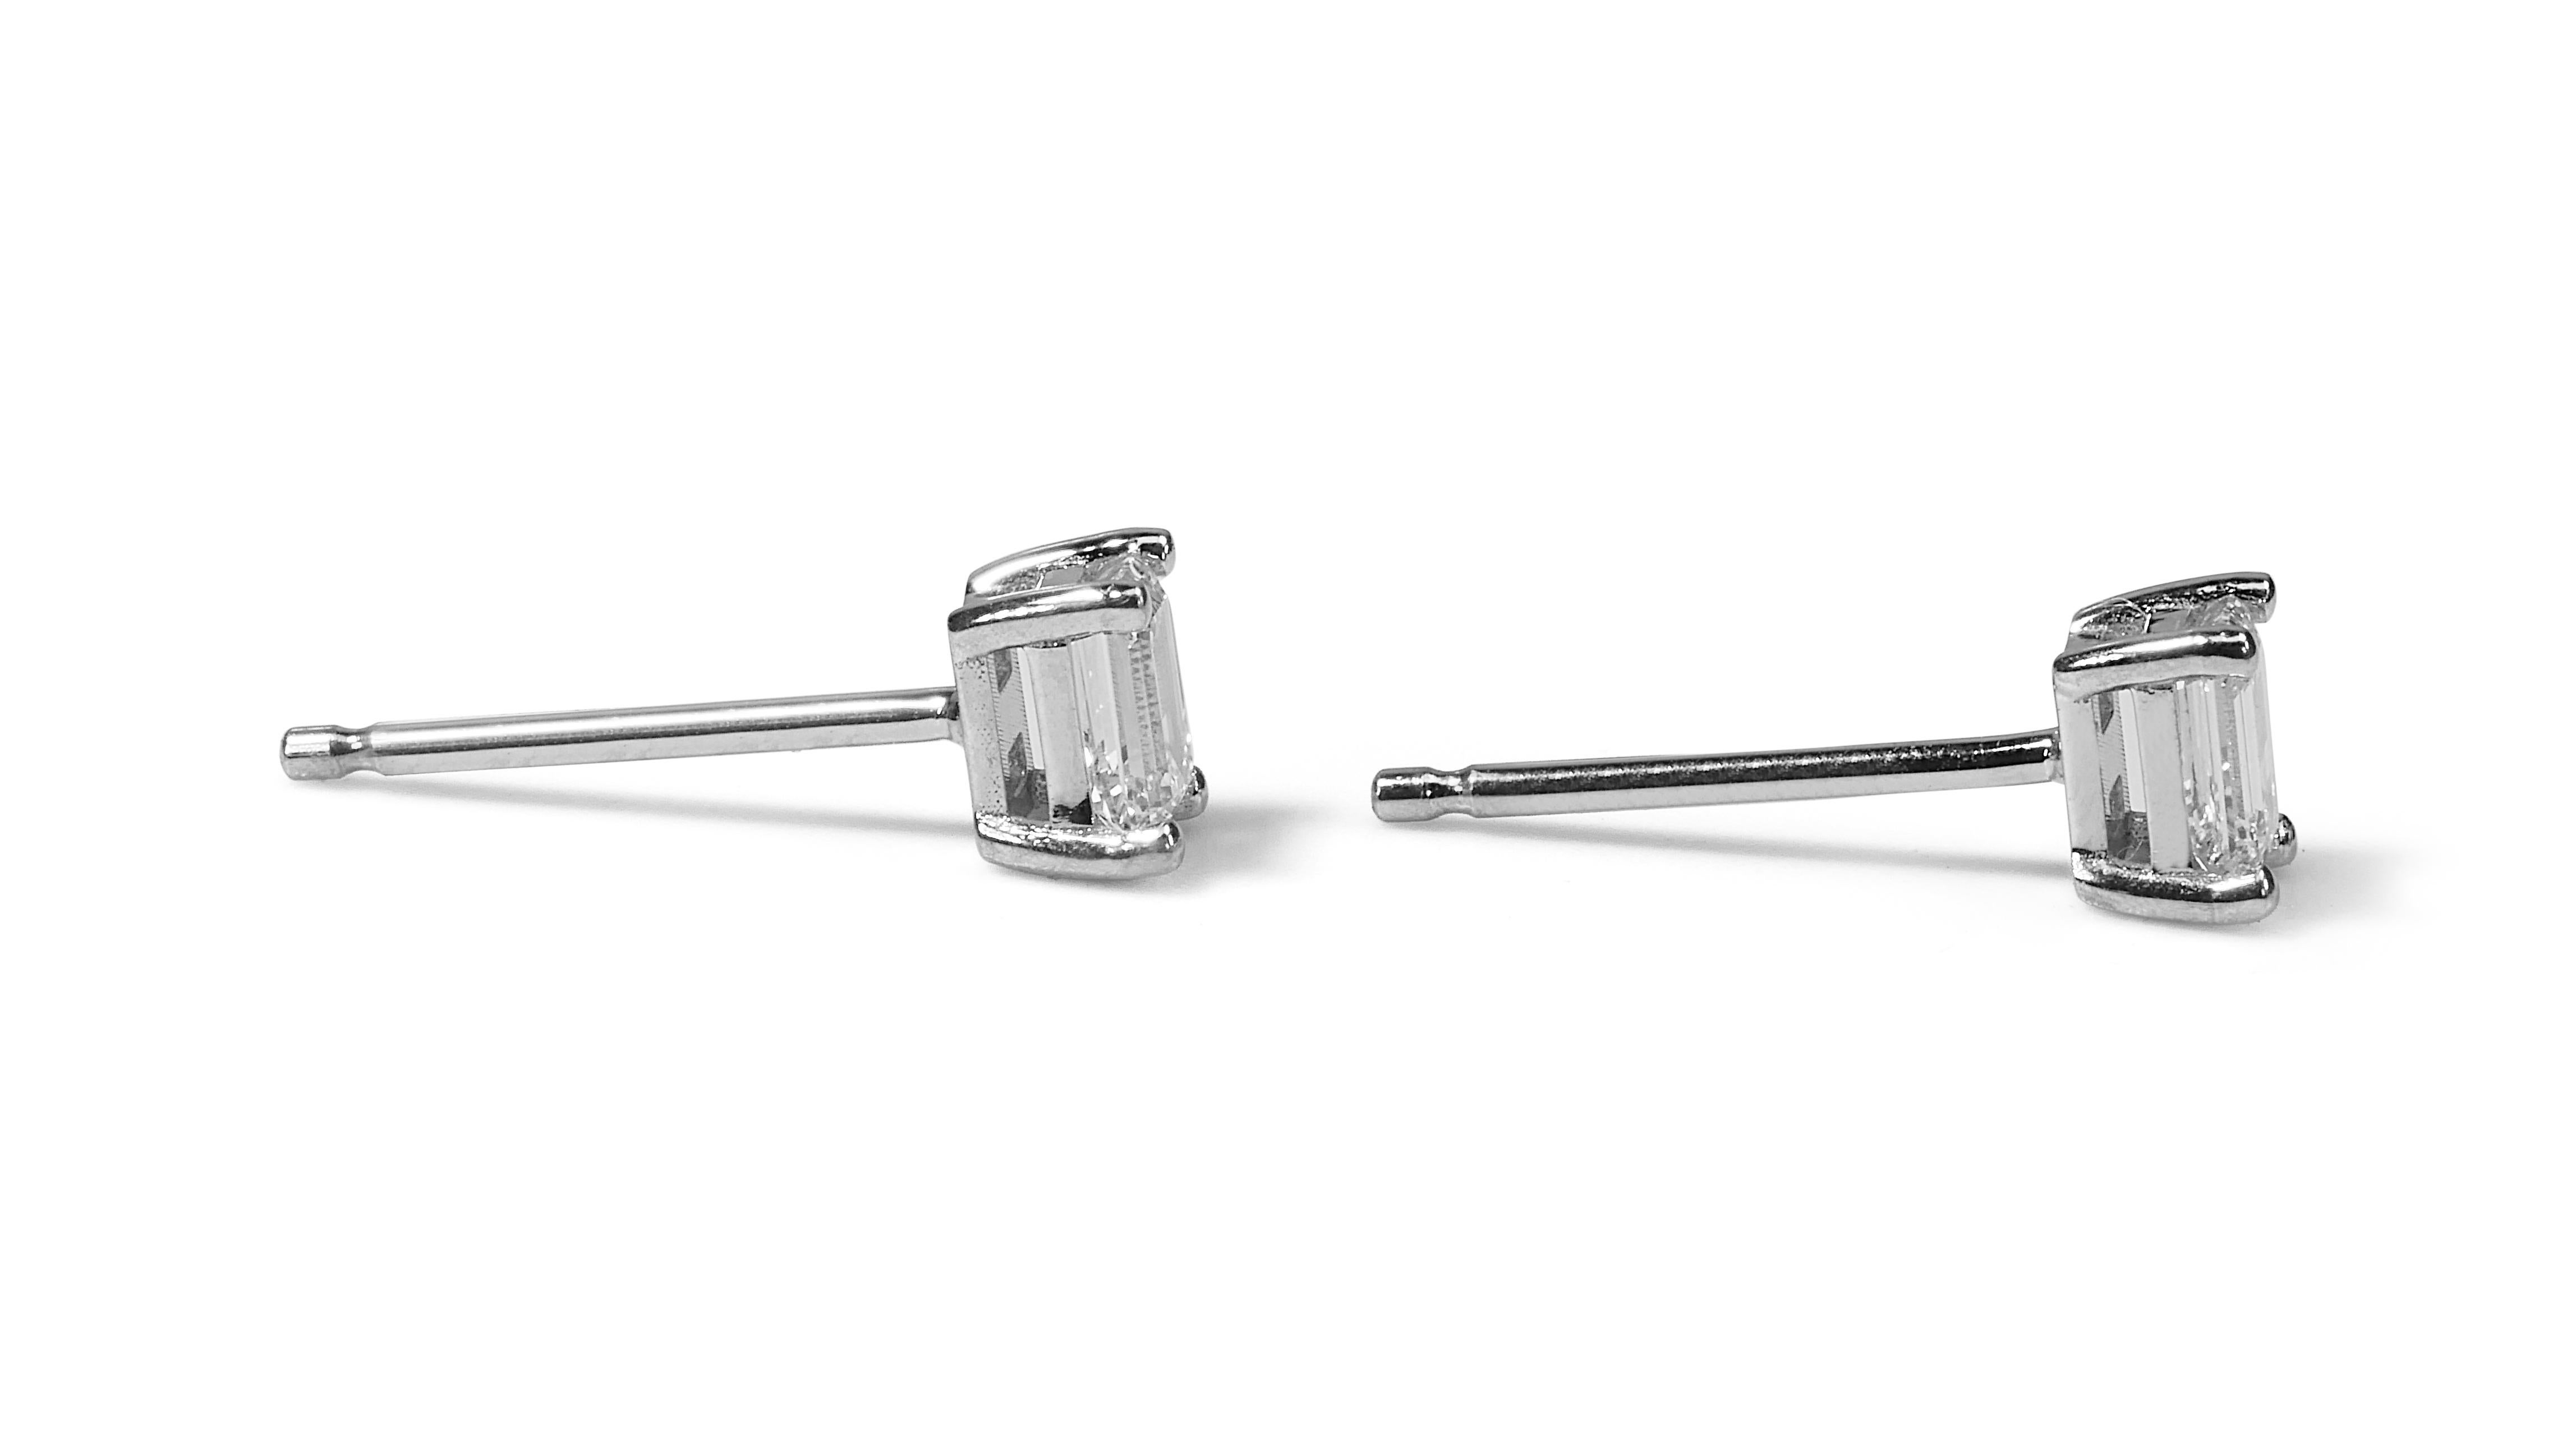 Timeless 2.02ct Diamond Stud Earrings in 18k White Gold - GIA Certified For Sale 1